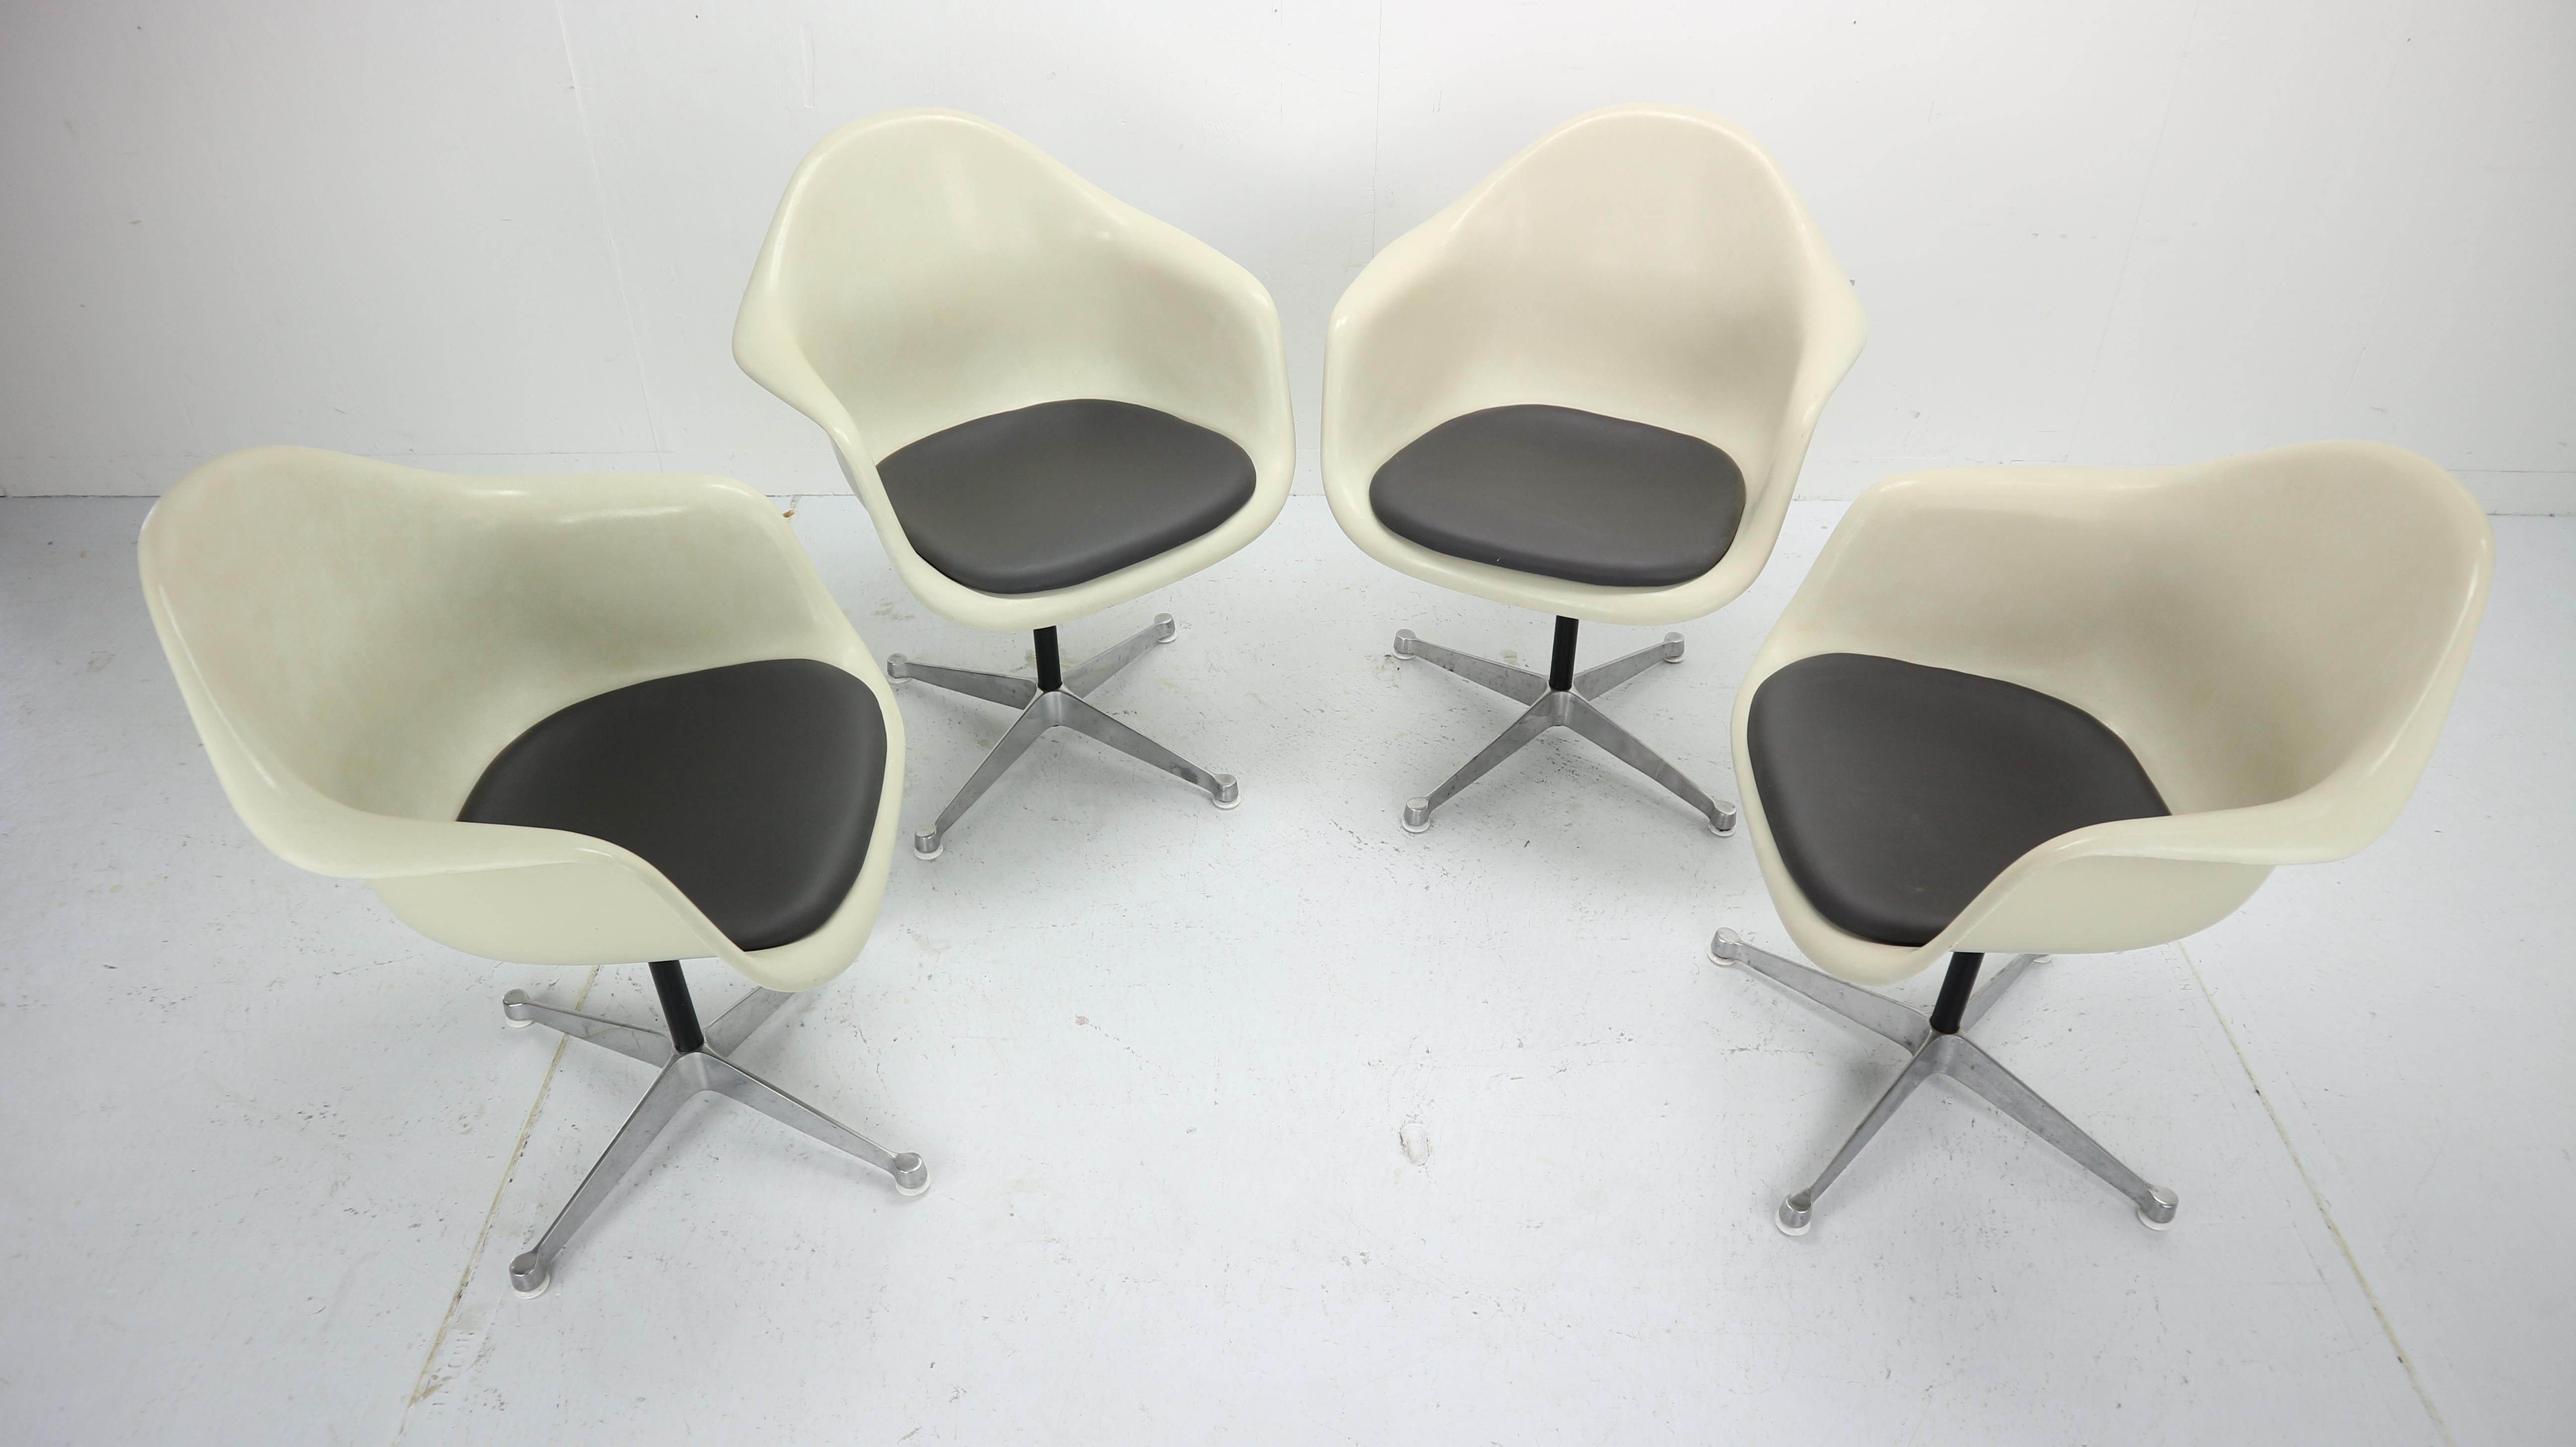 American Set of 4 Charles Eames for Herman Miller Bucket Swivel Chairs, 1950s